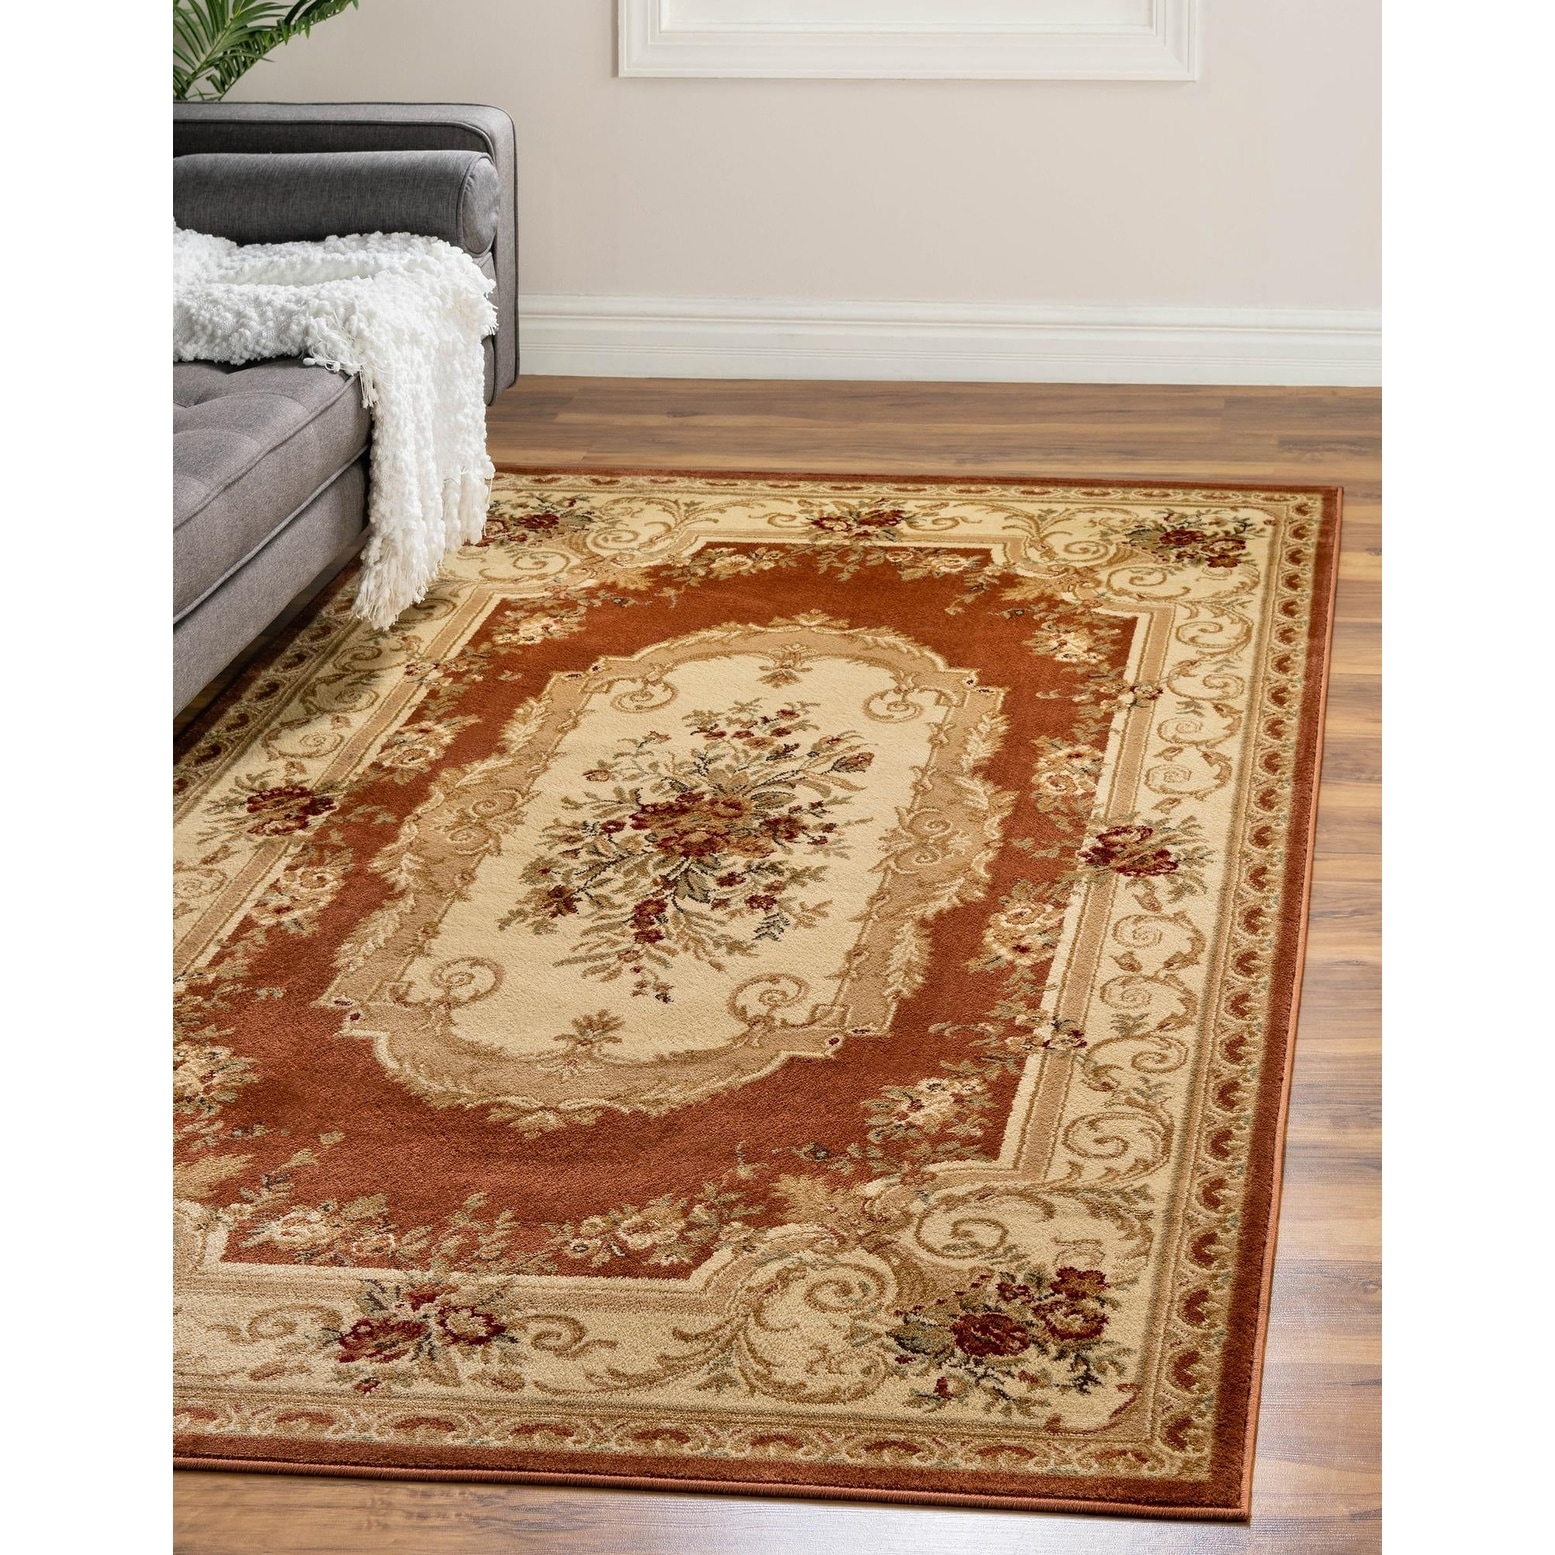 6' 0 x 6' 0 Round, Brown/ Ivory Unique Loom Versailles Collection Traditional Classic Medallion Floral Motif Area Rug